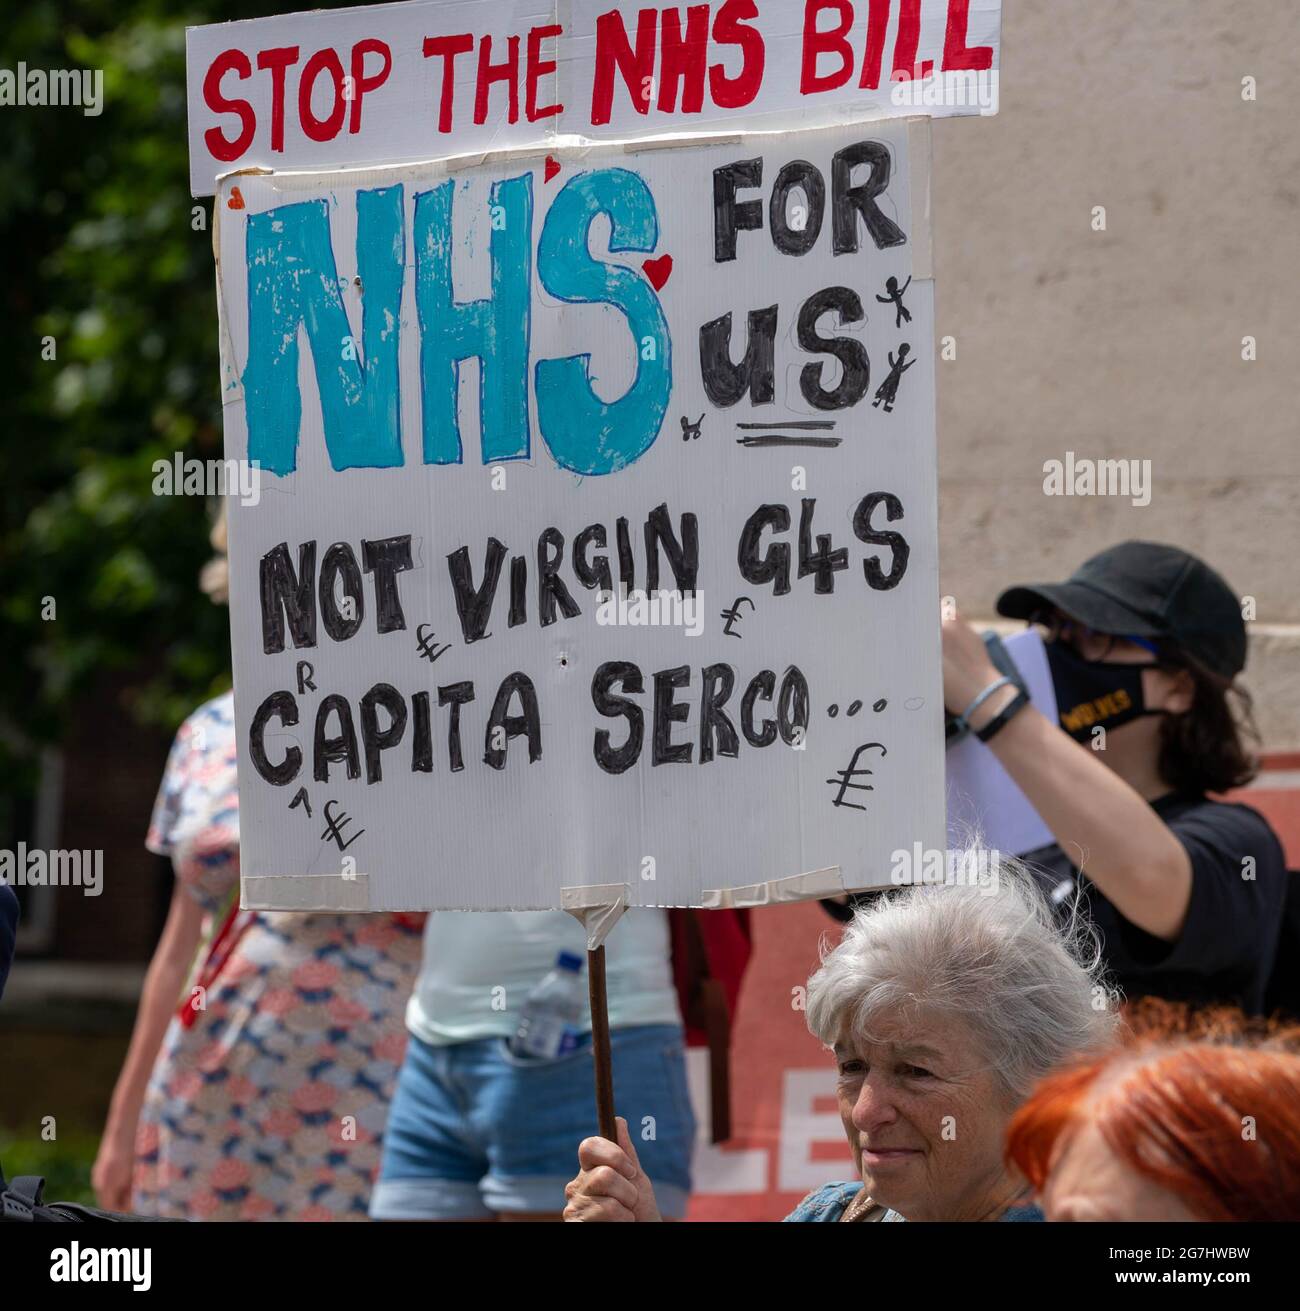 London, UK. 14th July, 2021. Keep our NHS public protest outside the Houses of Parliament Credit: Ian Davidson/Alamy Live News Stock Photo